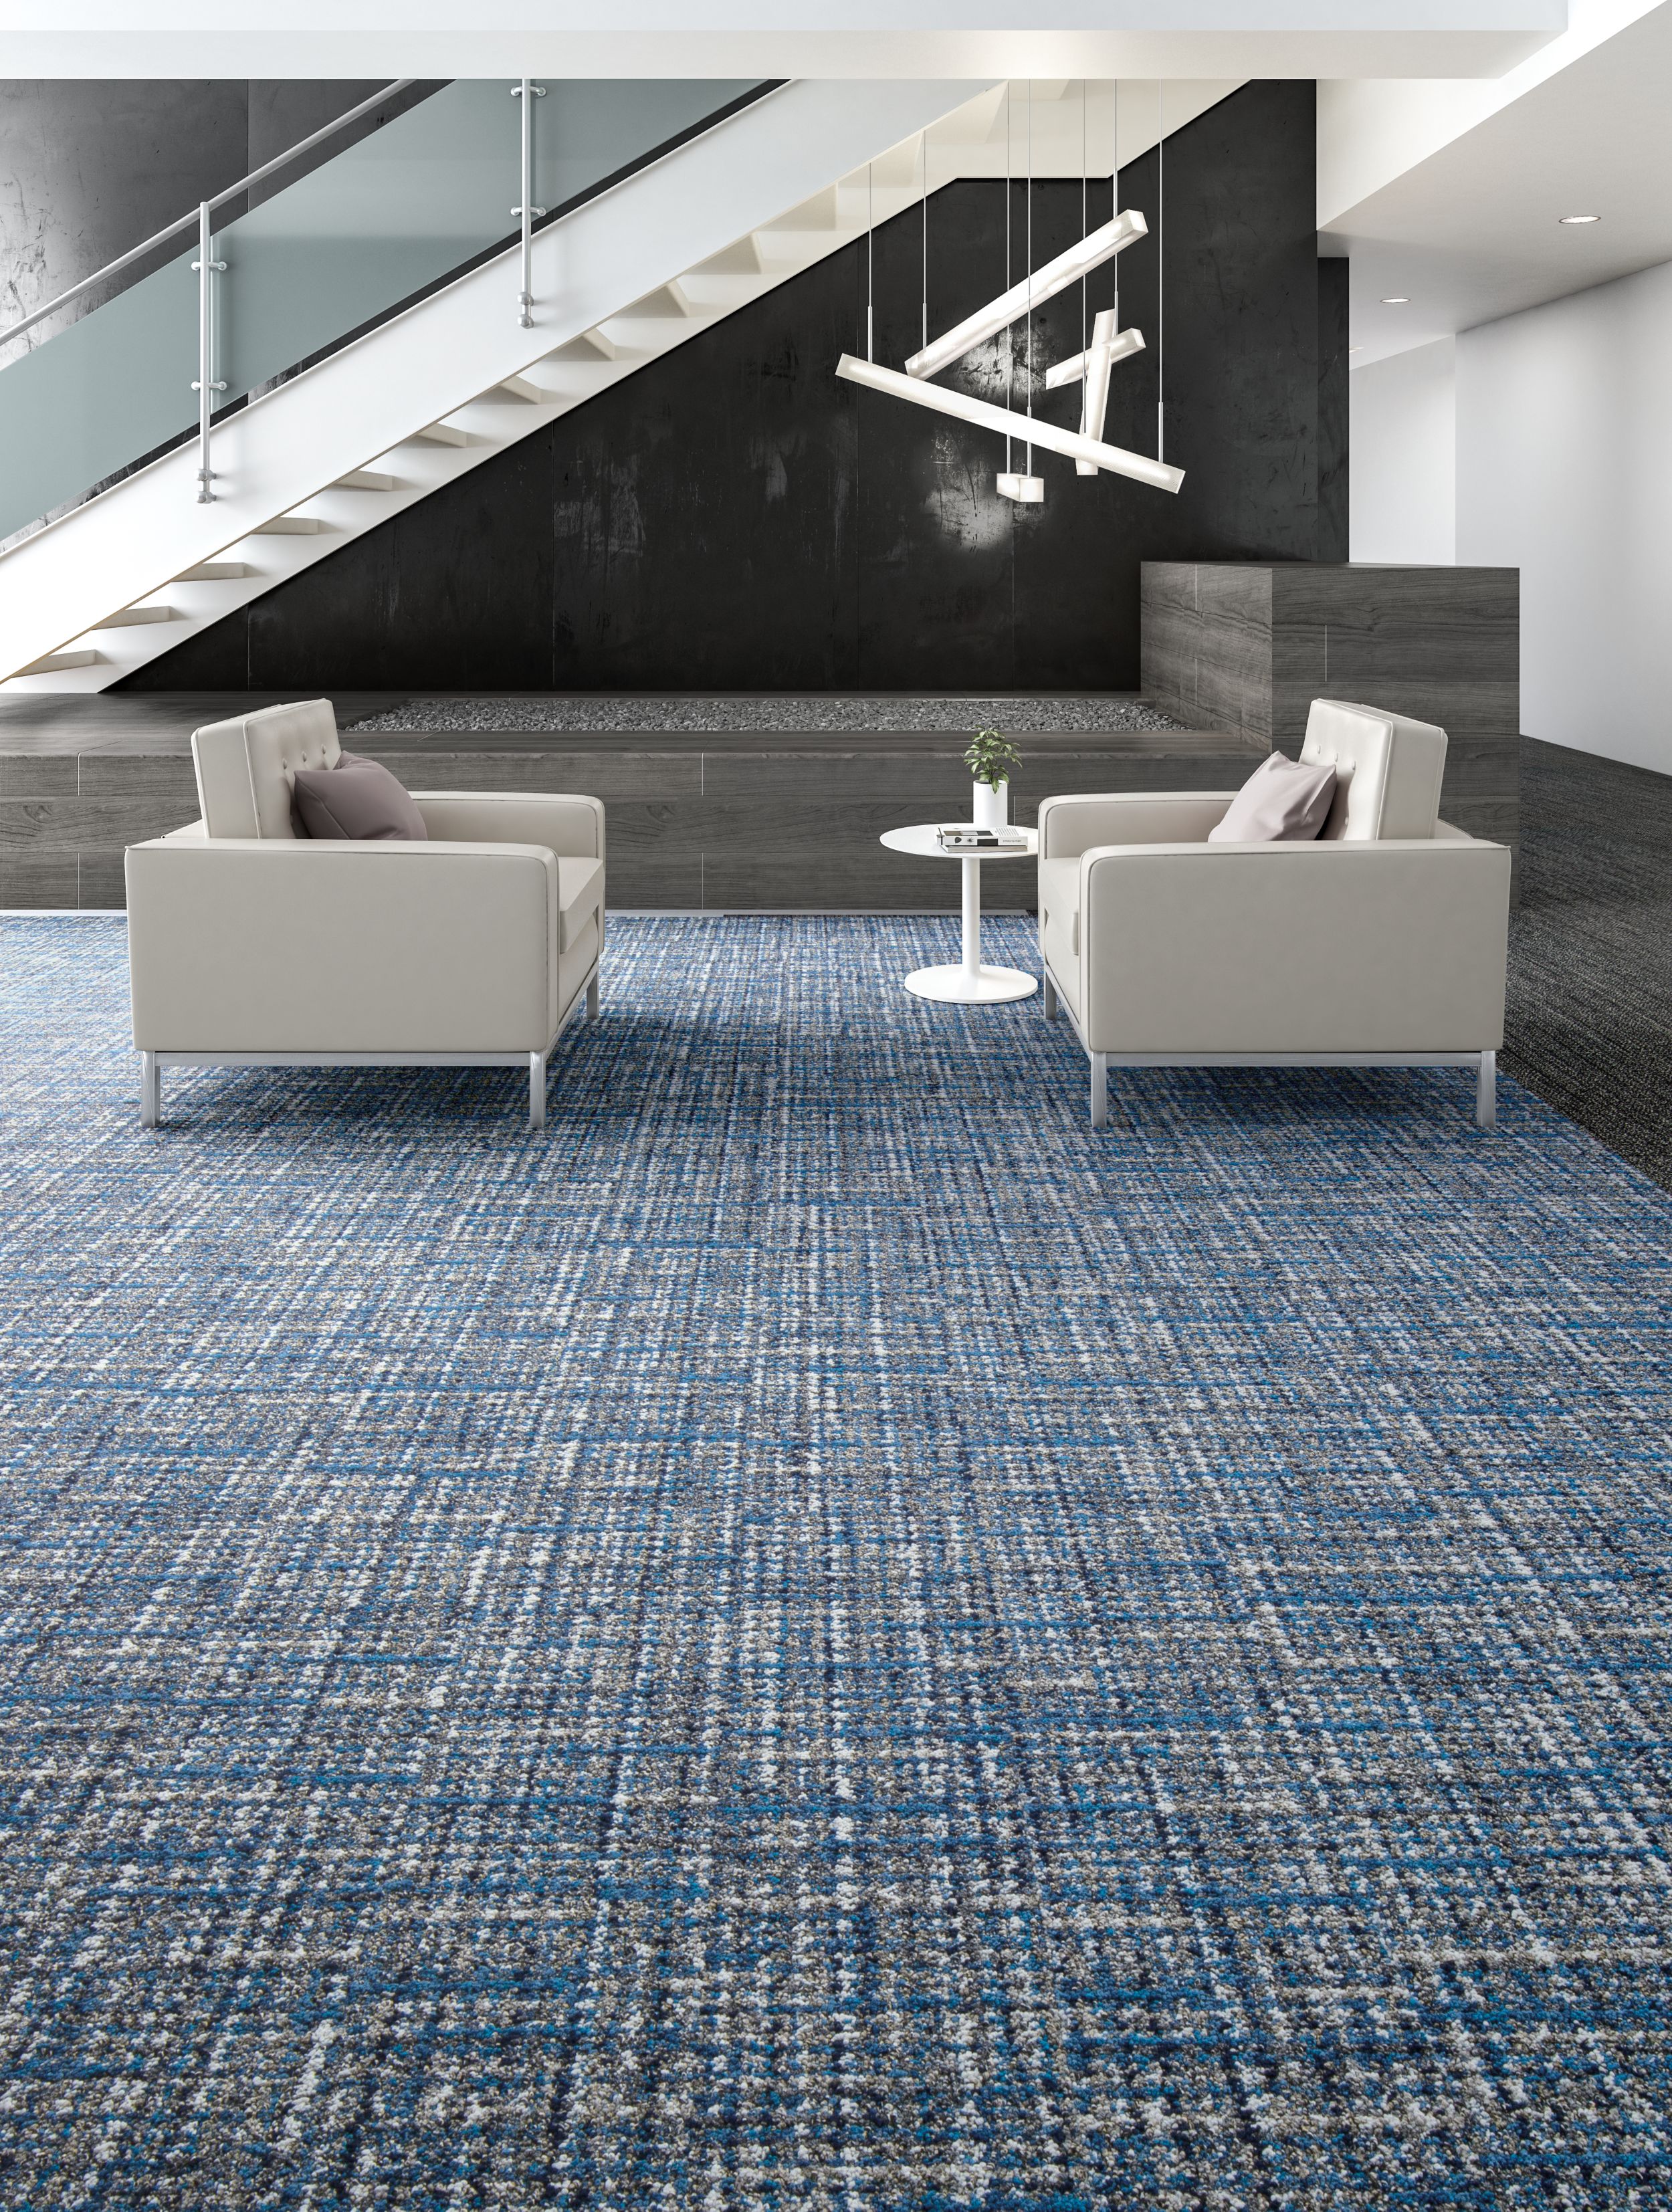 Interface WW895 plank carpet tile in lobby area with couches and side table  afbeeldingnummer 12